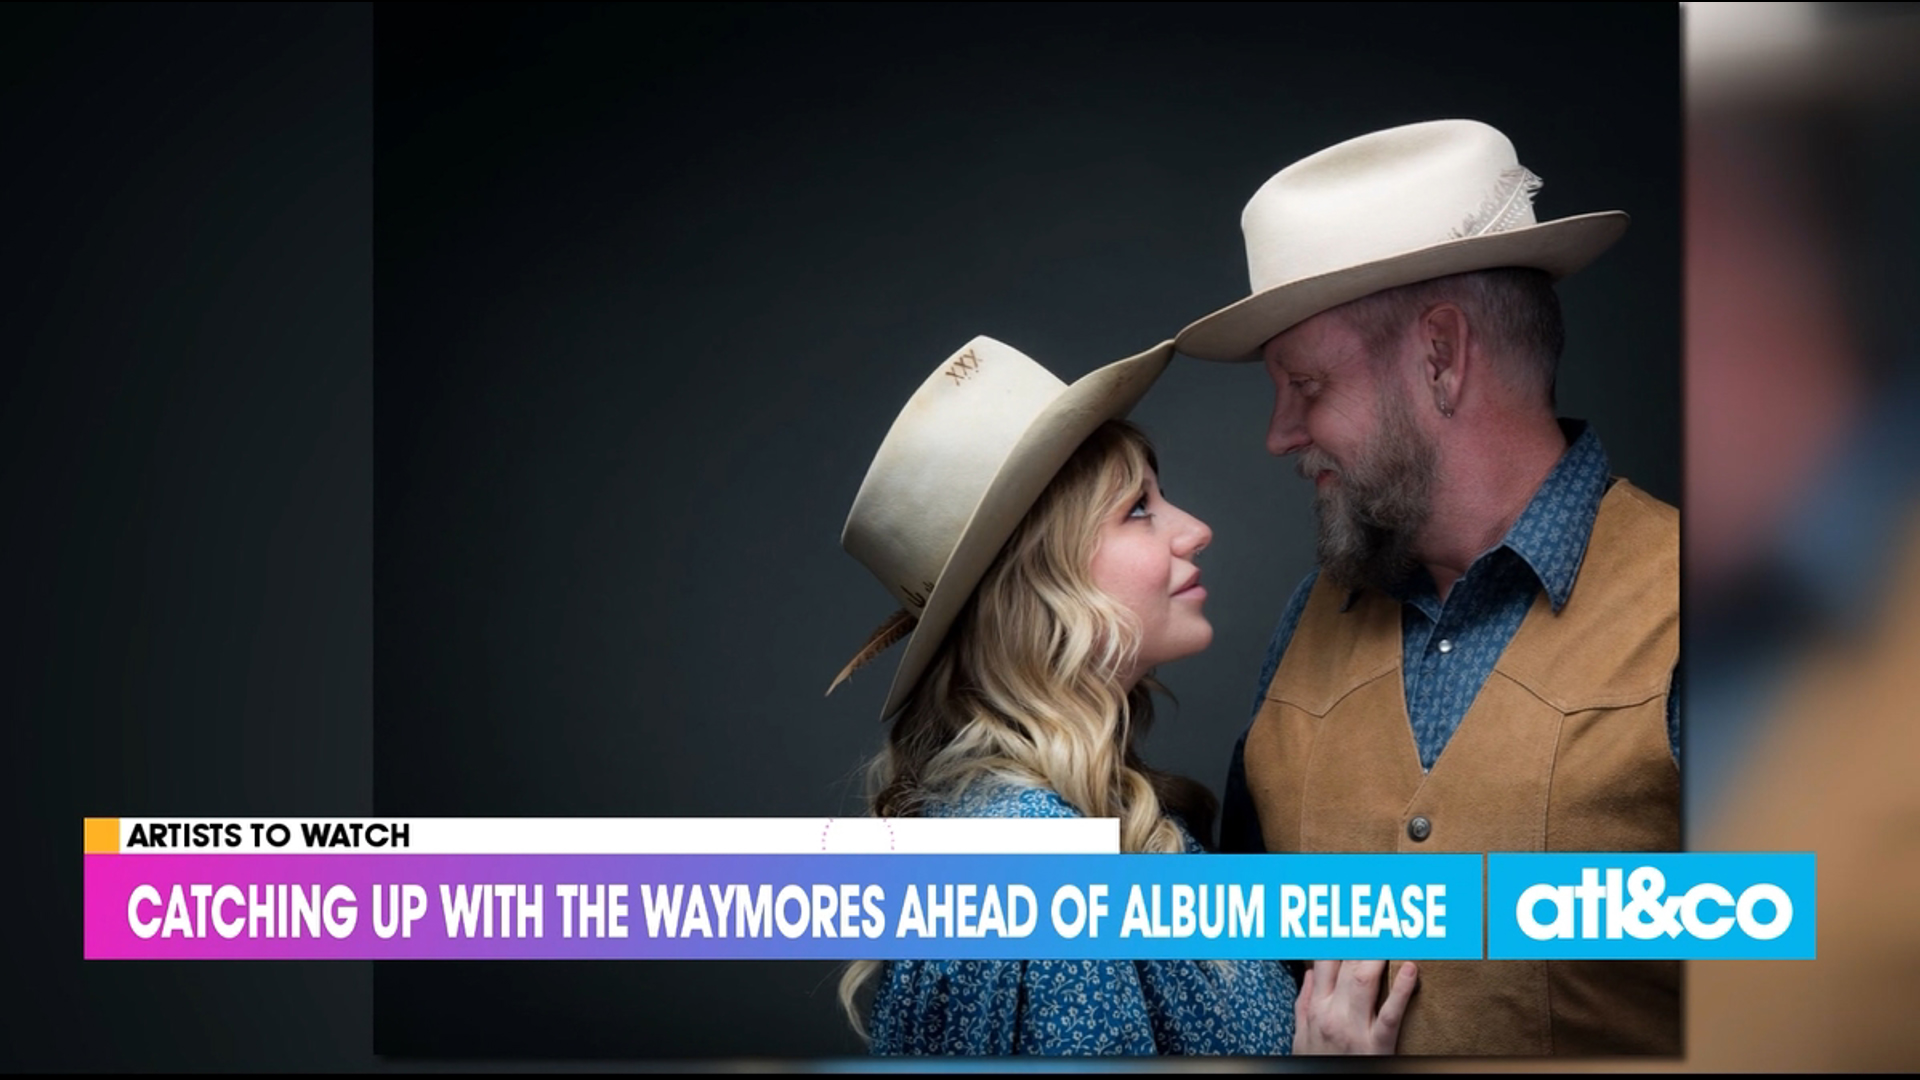 The Waymores play authentic country music with an Americana flourish. Watch them perform a new song off their second album 'Stone Sessions.'